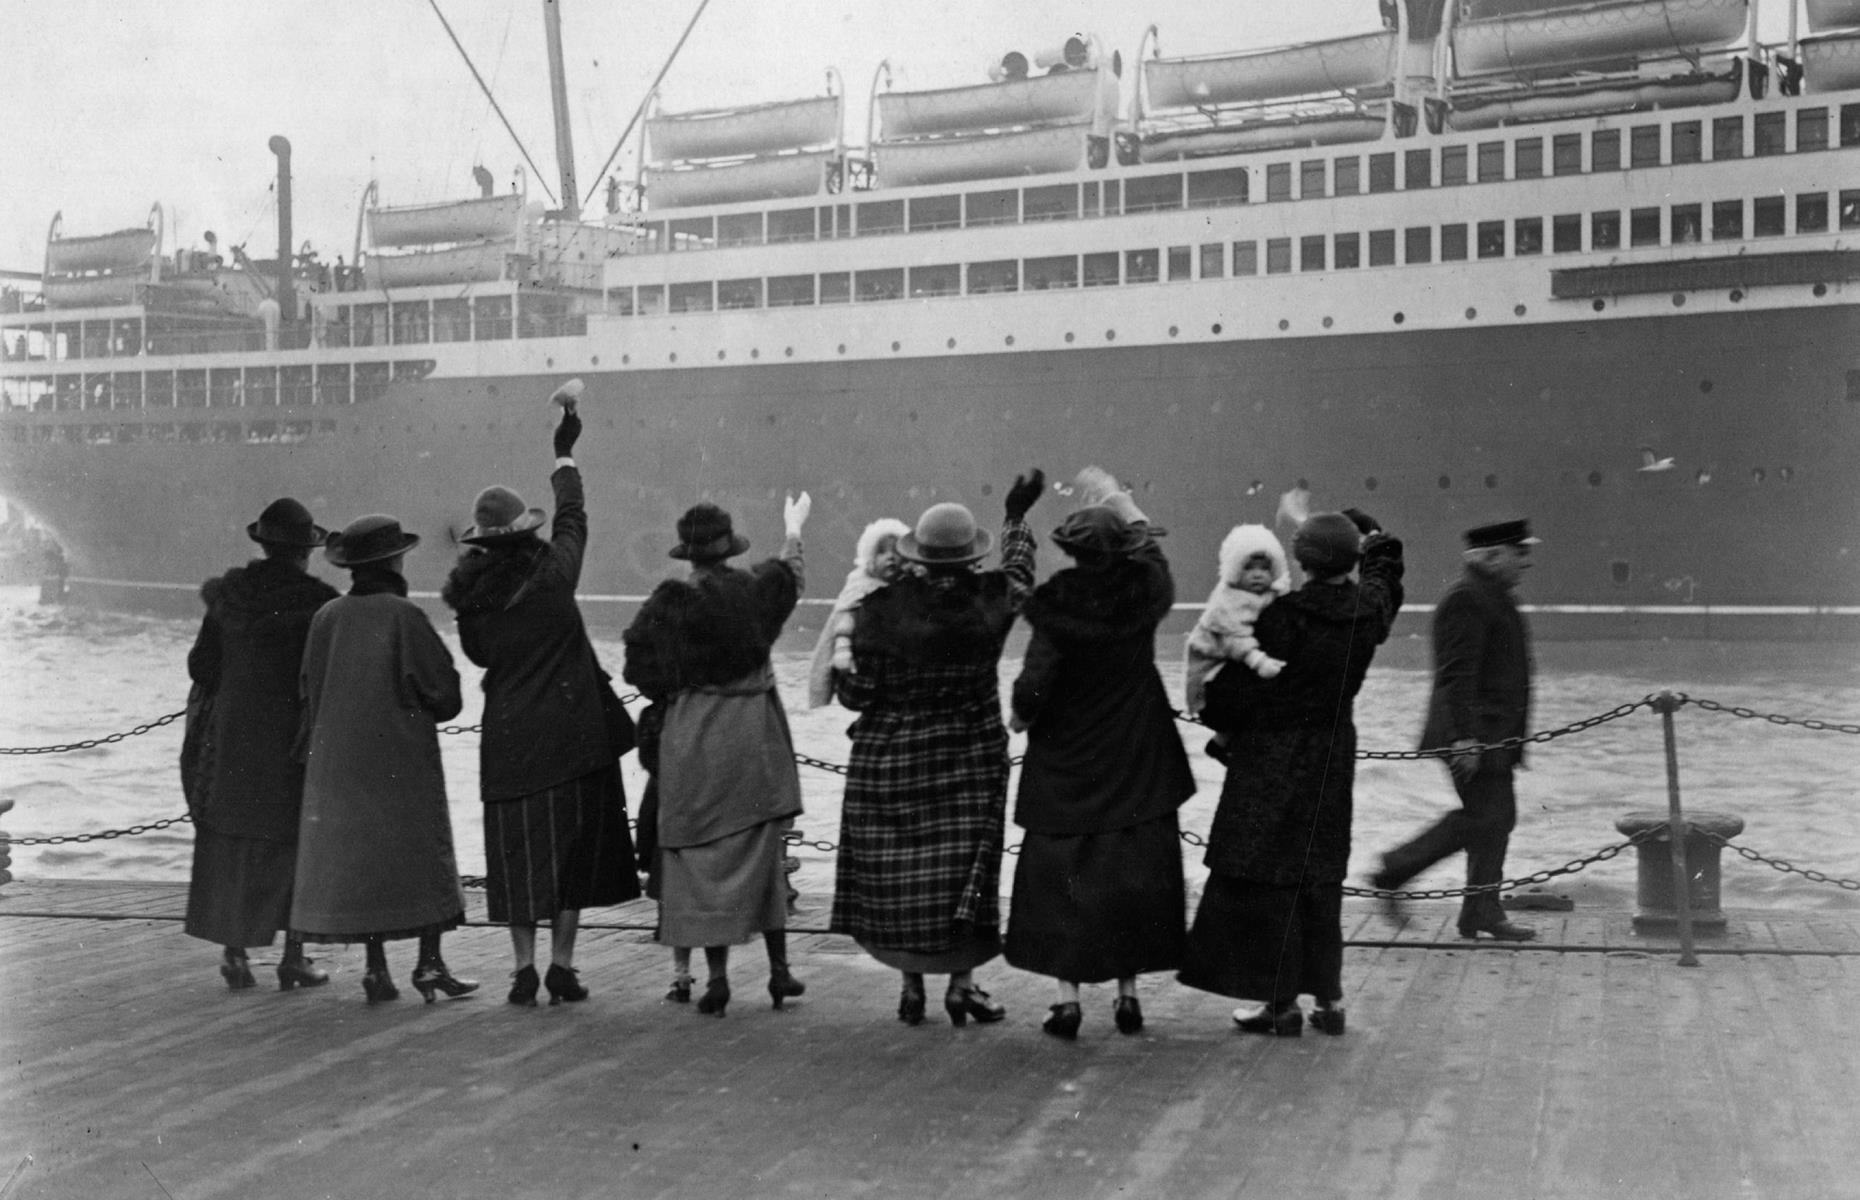 Another major milestone came in the 1920s: the very first round-the-world cruise. The Cunard Line's RMS Laconia (pictured here leaving Liverpool circa 1920) sailed around the globe in 1922, calling at 22 ports along the way, and taking 450 lucky passengers with her.